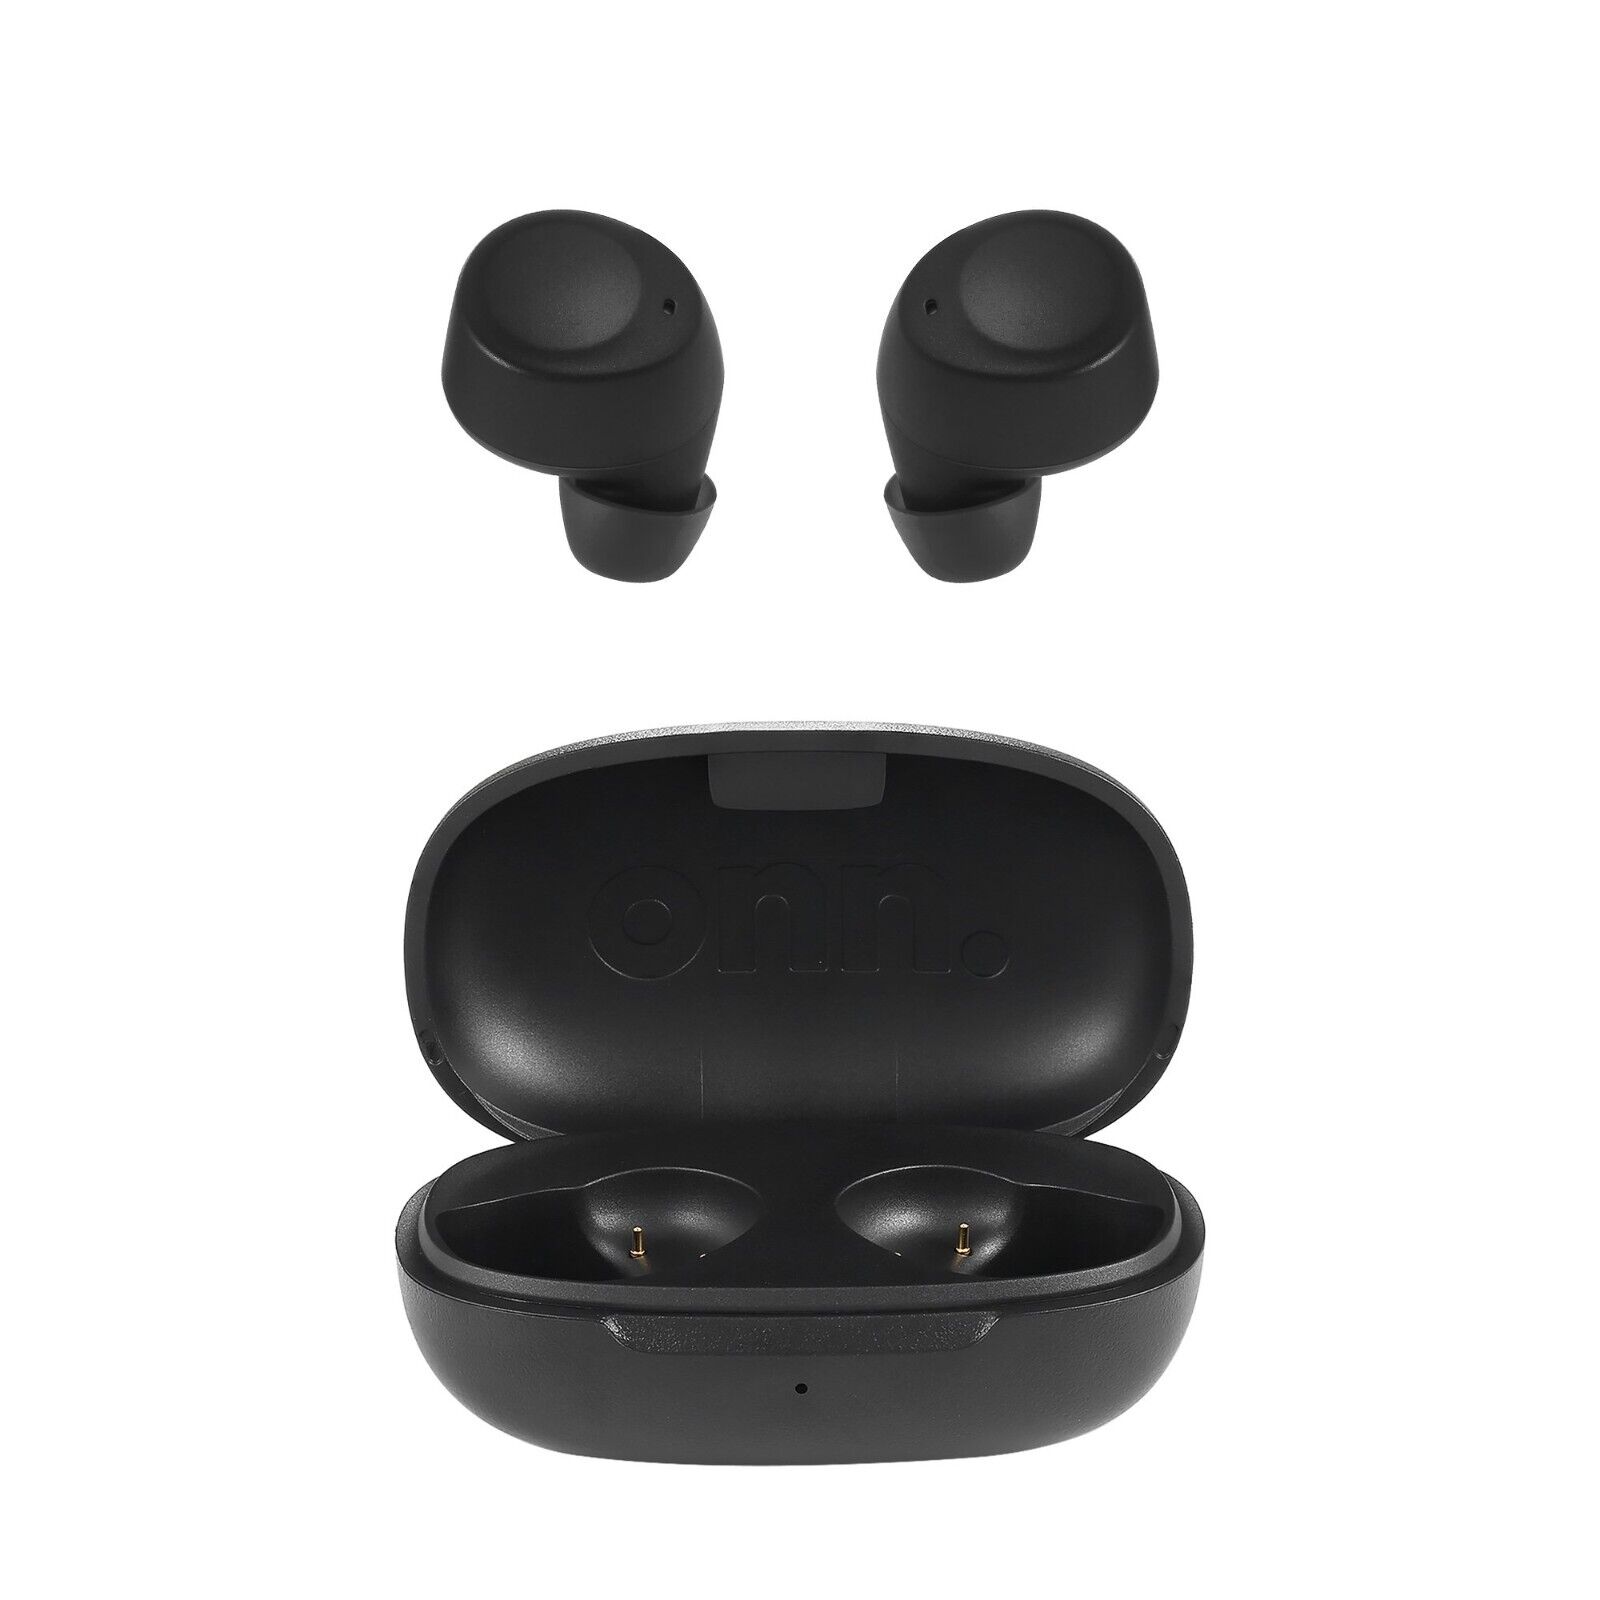 Quick Guide To Resetting Onn TWS Wireless Earbuds